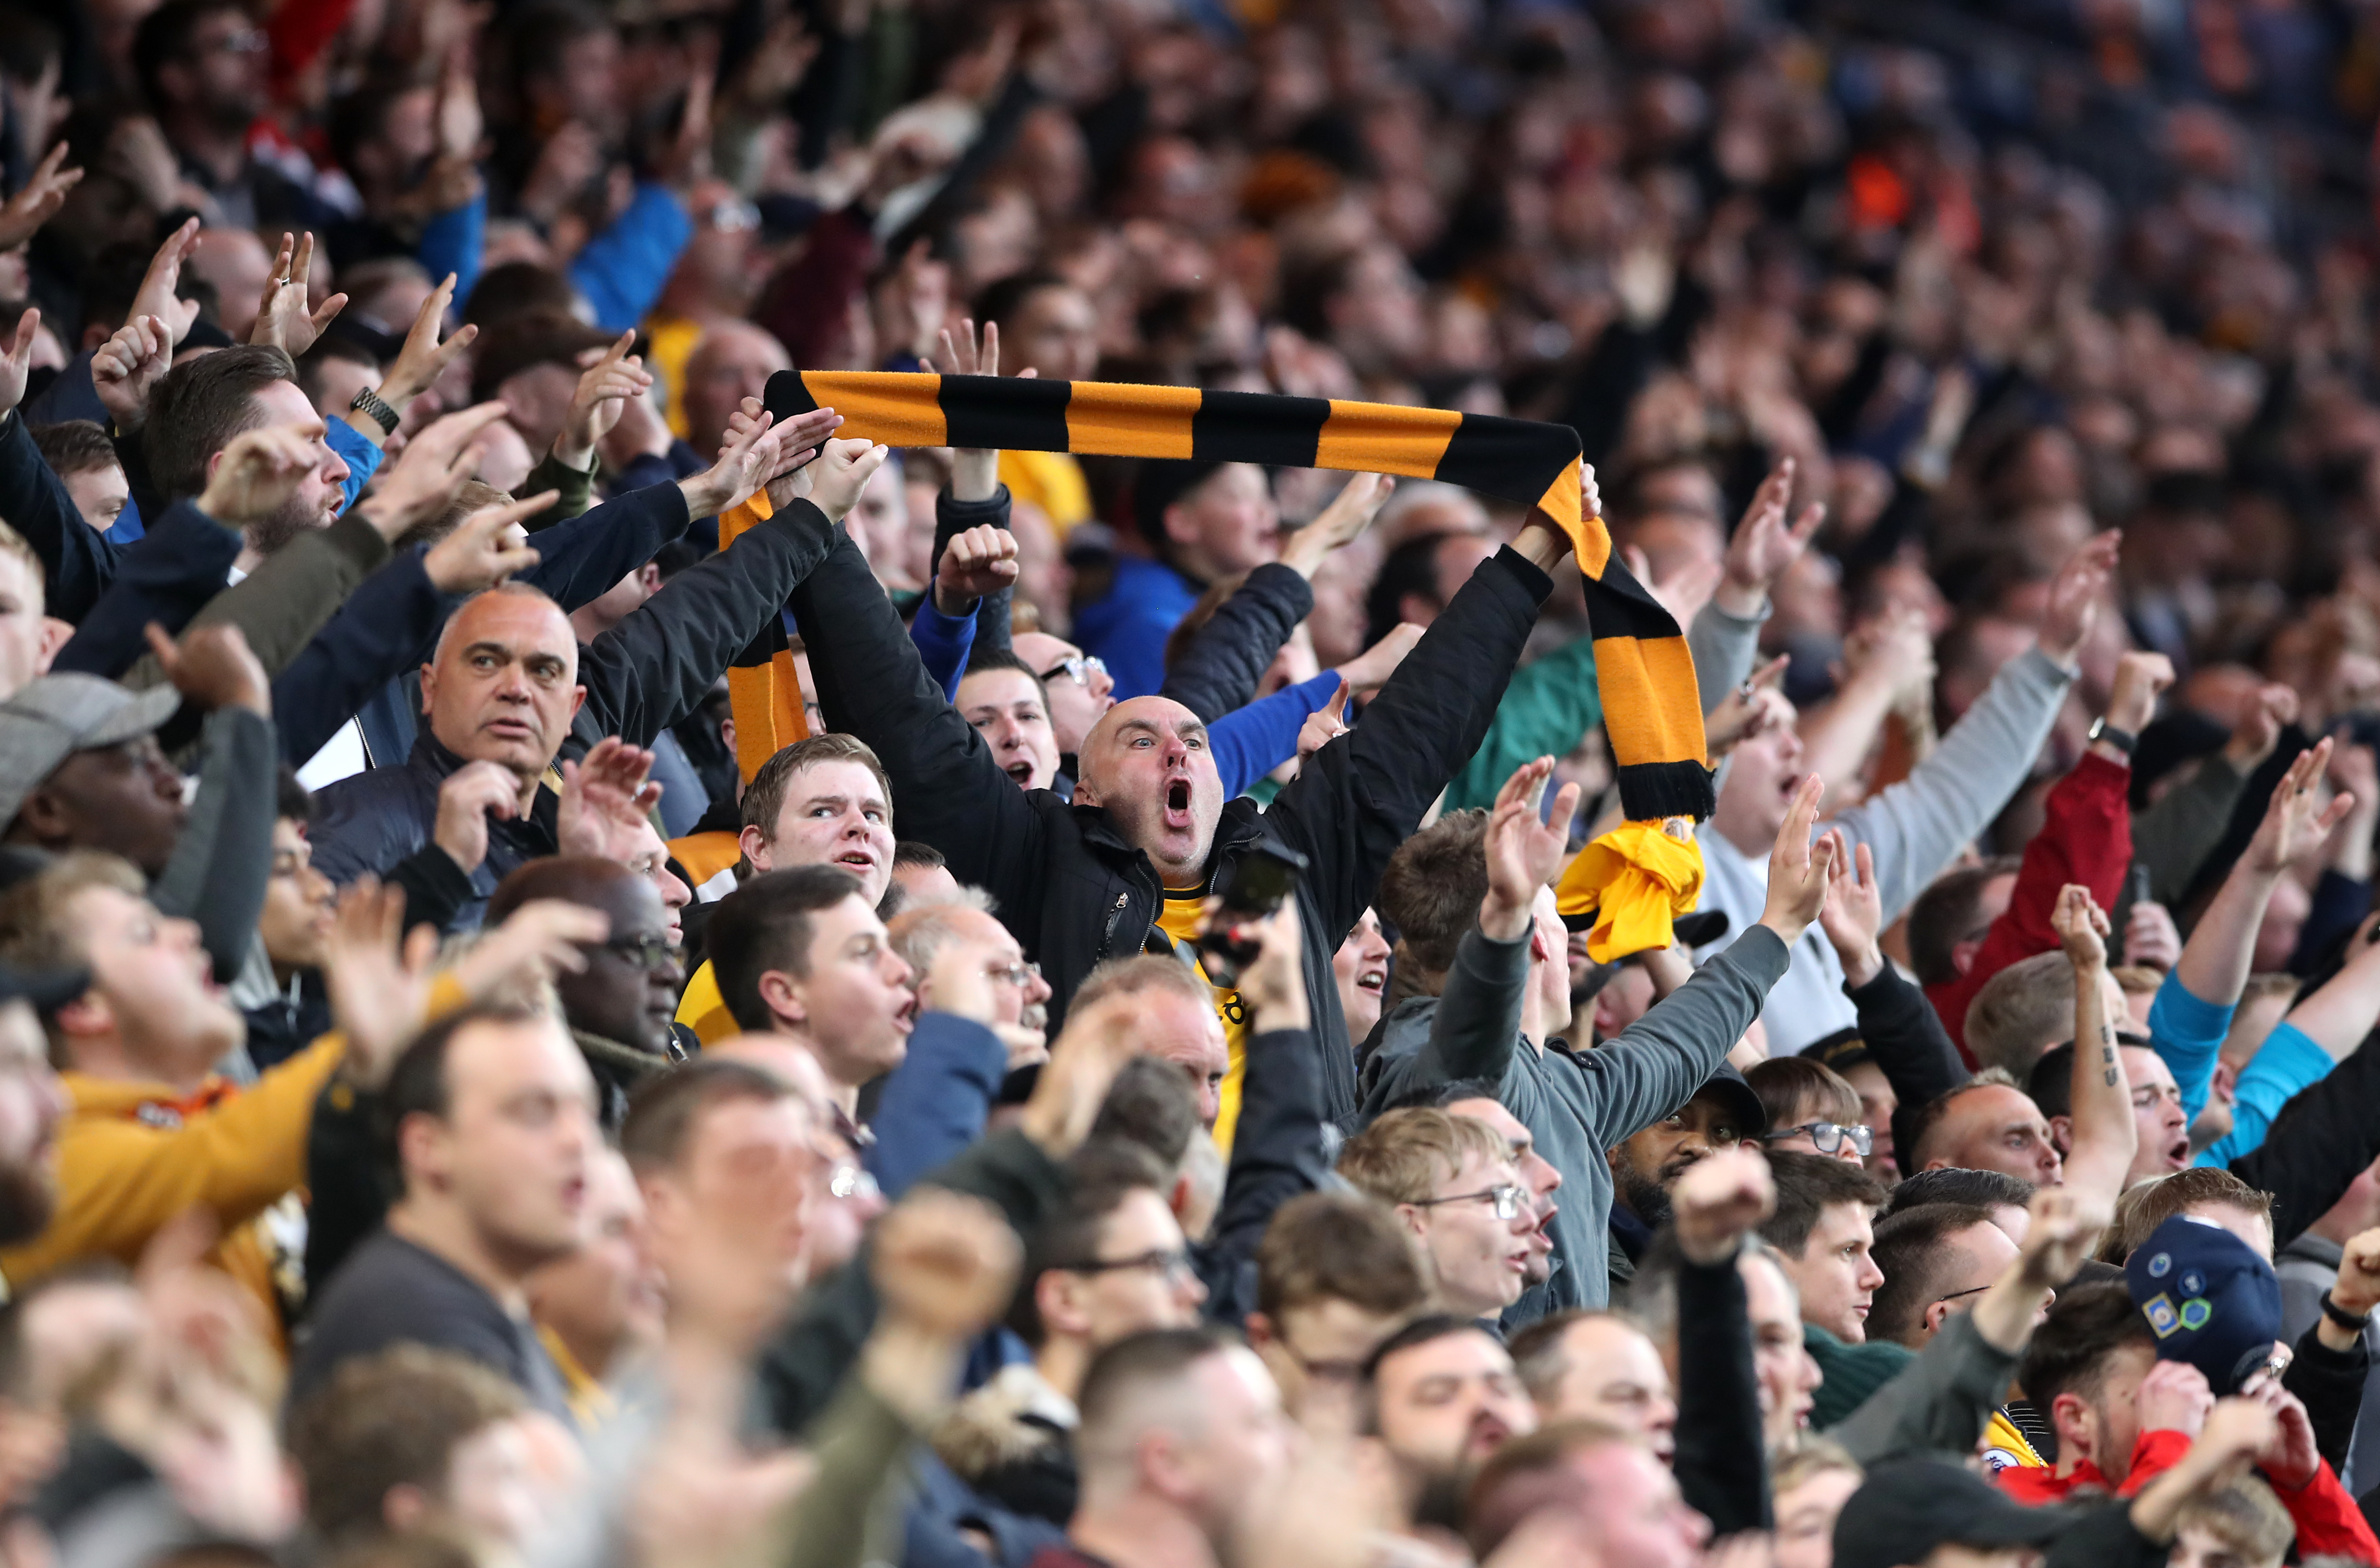 Wolverhampton Wanderers fans celebrate in the stands during a Premier League match 